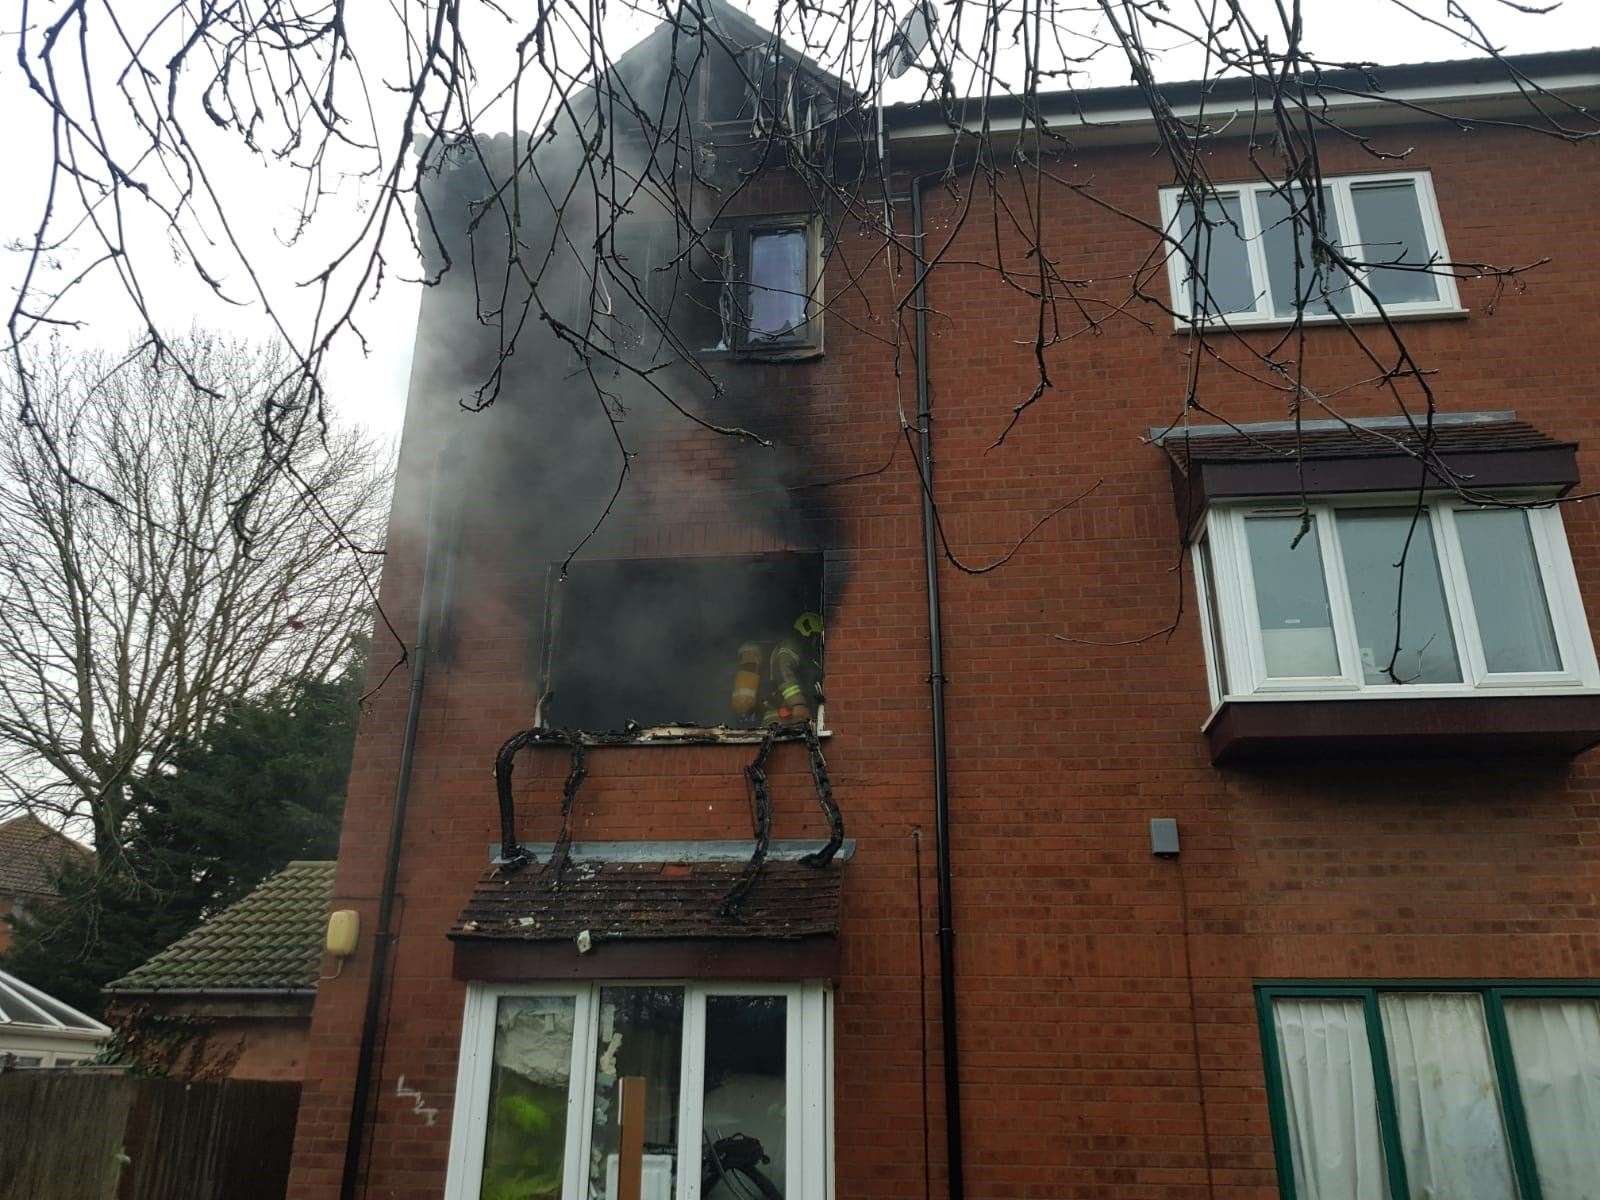 The flat fire at Chadwick Way in Thamesmead. Photo: LFB (